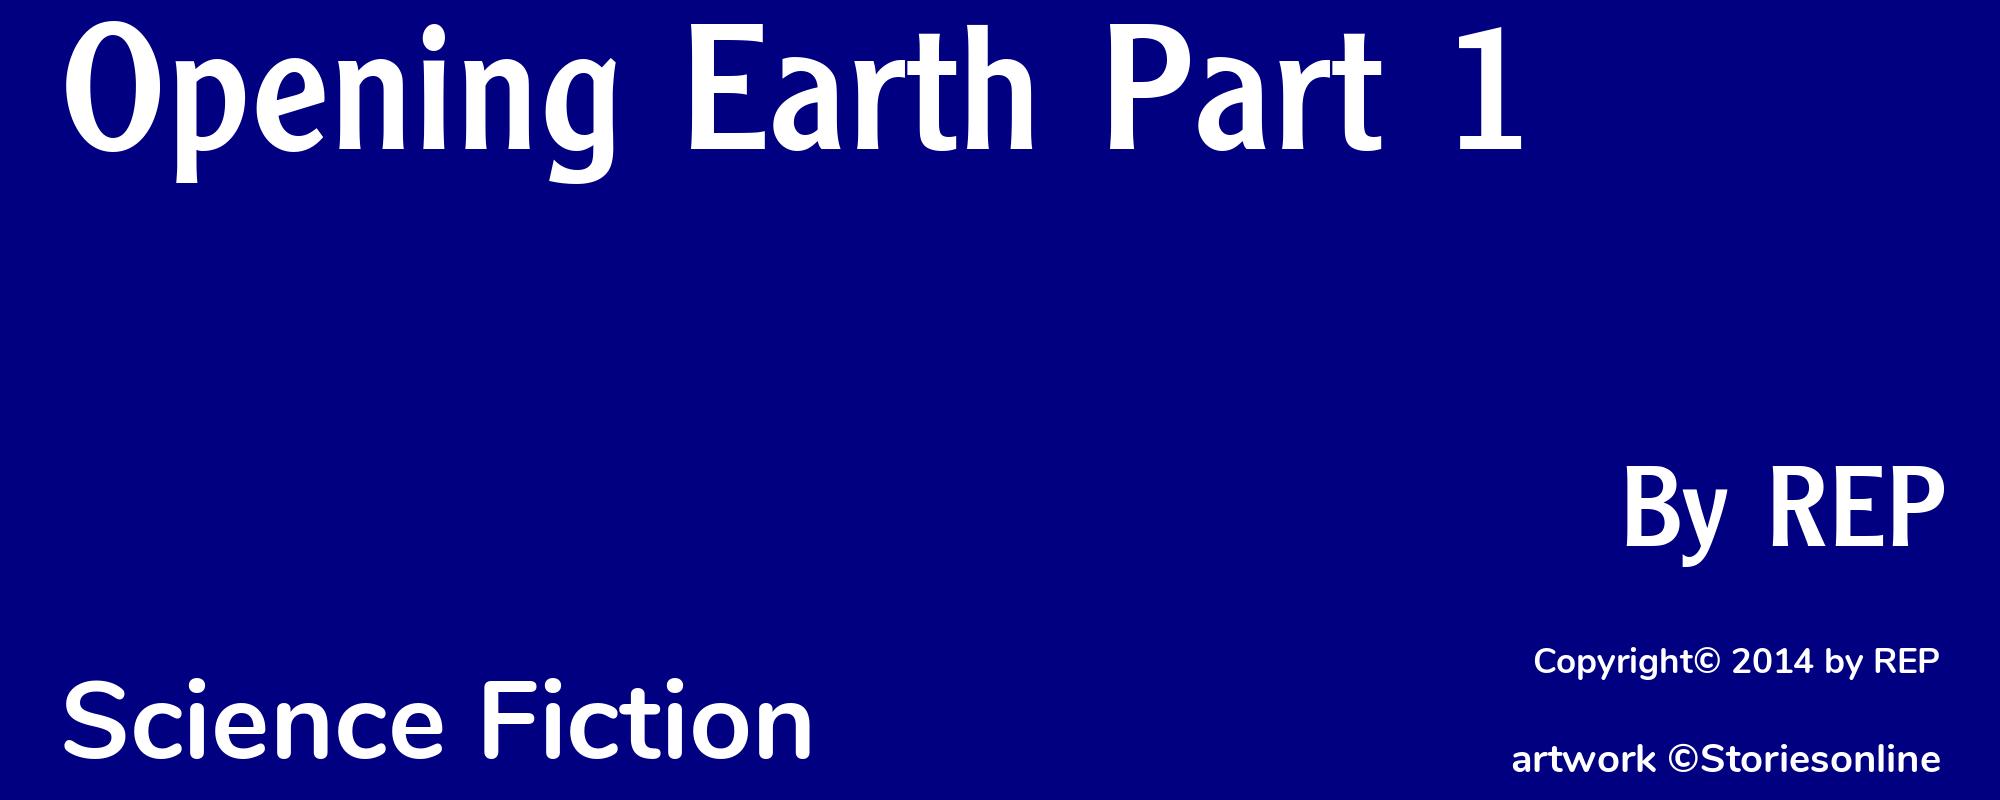 Opening Earth Part 1 - Cover